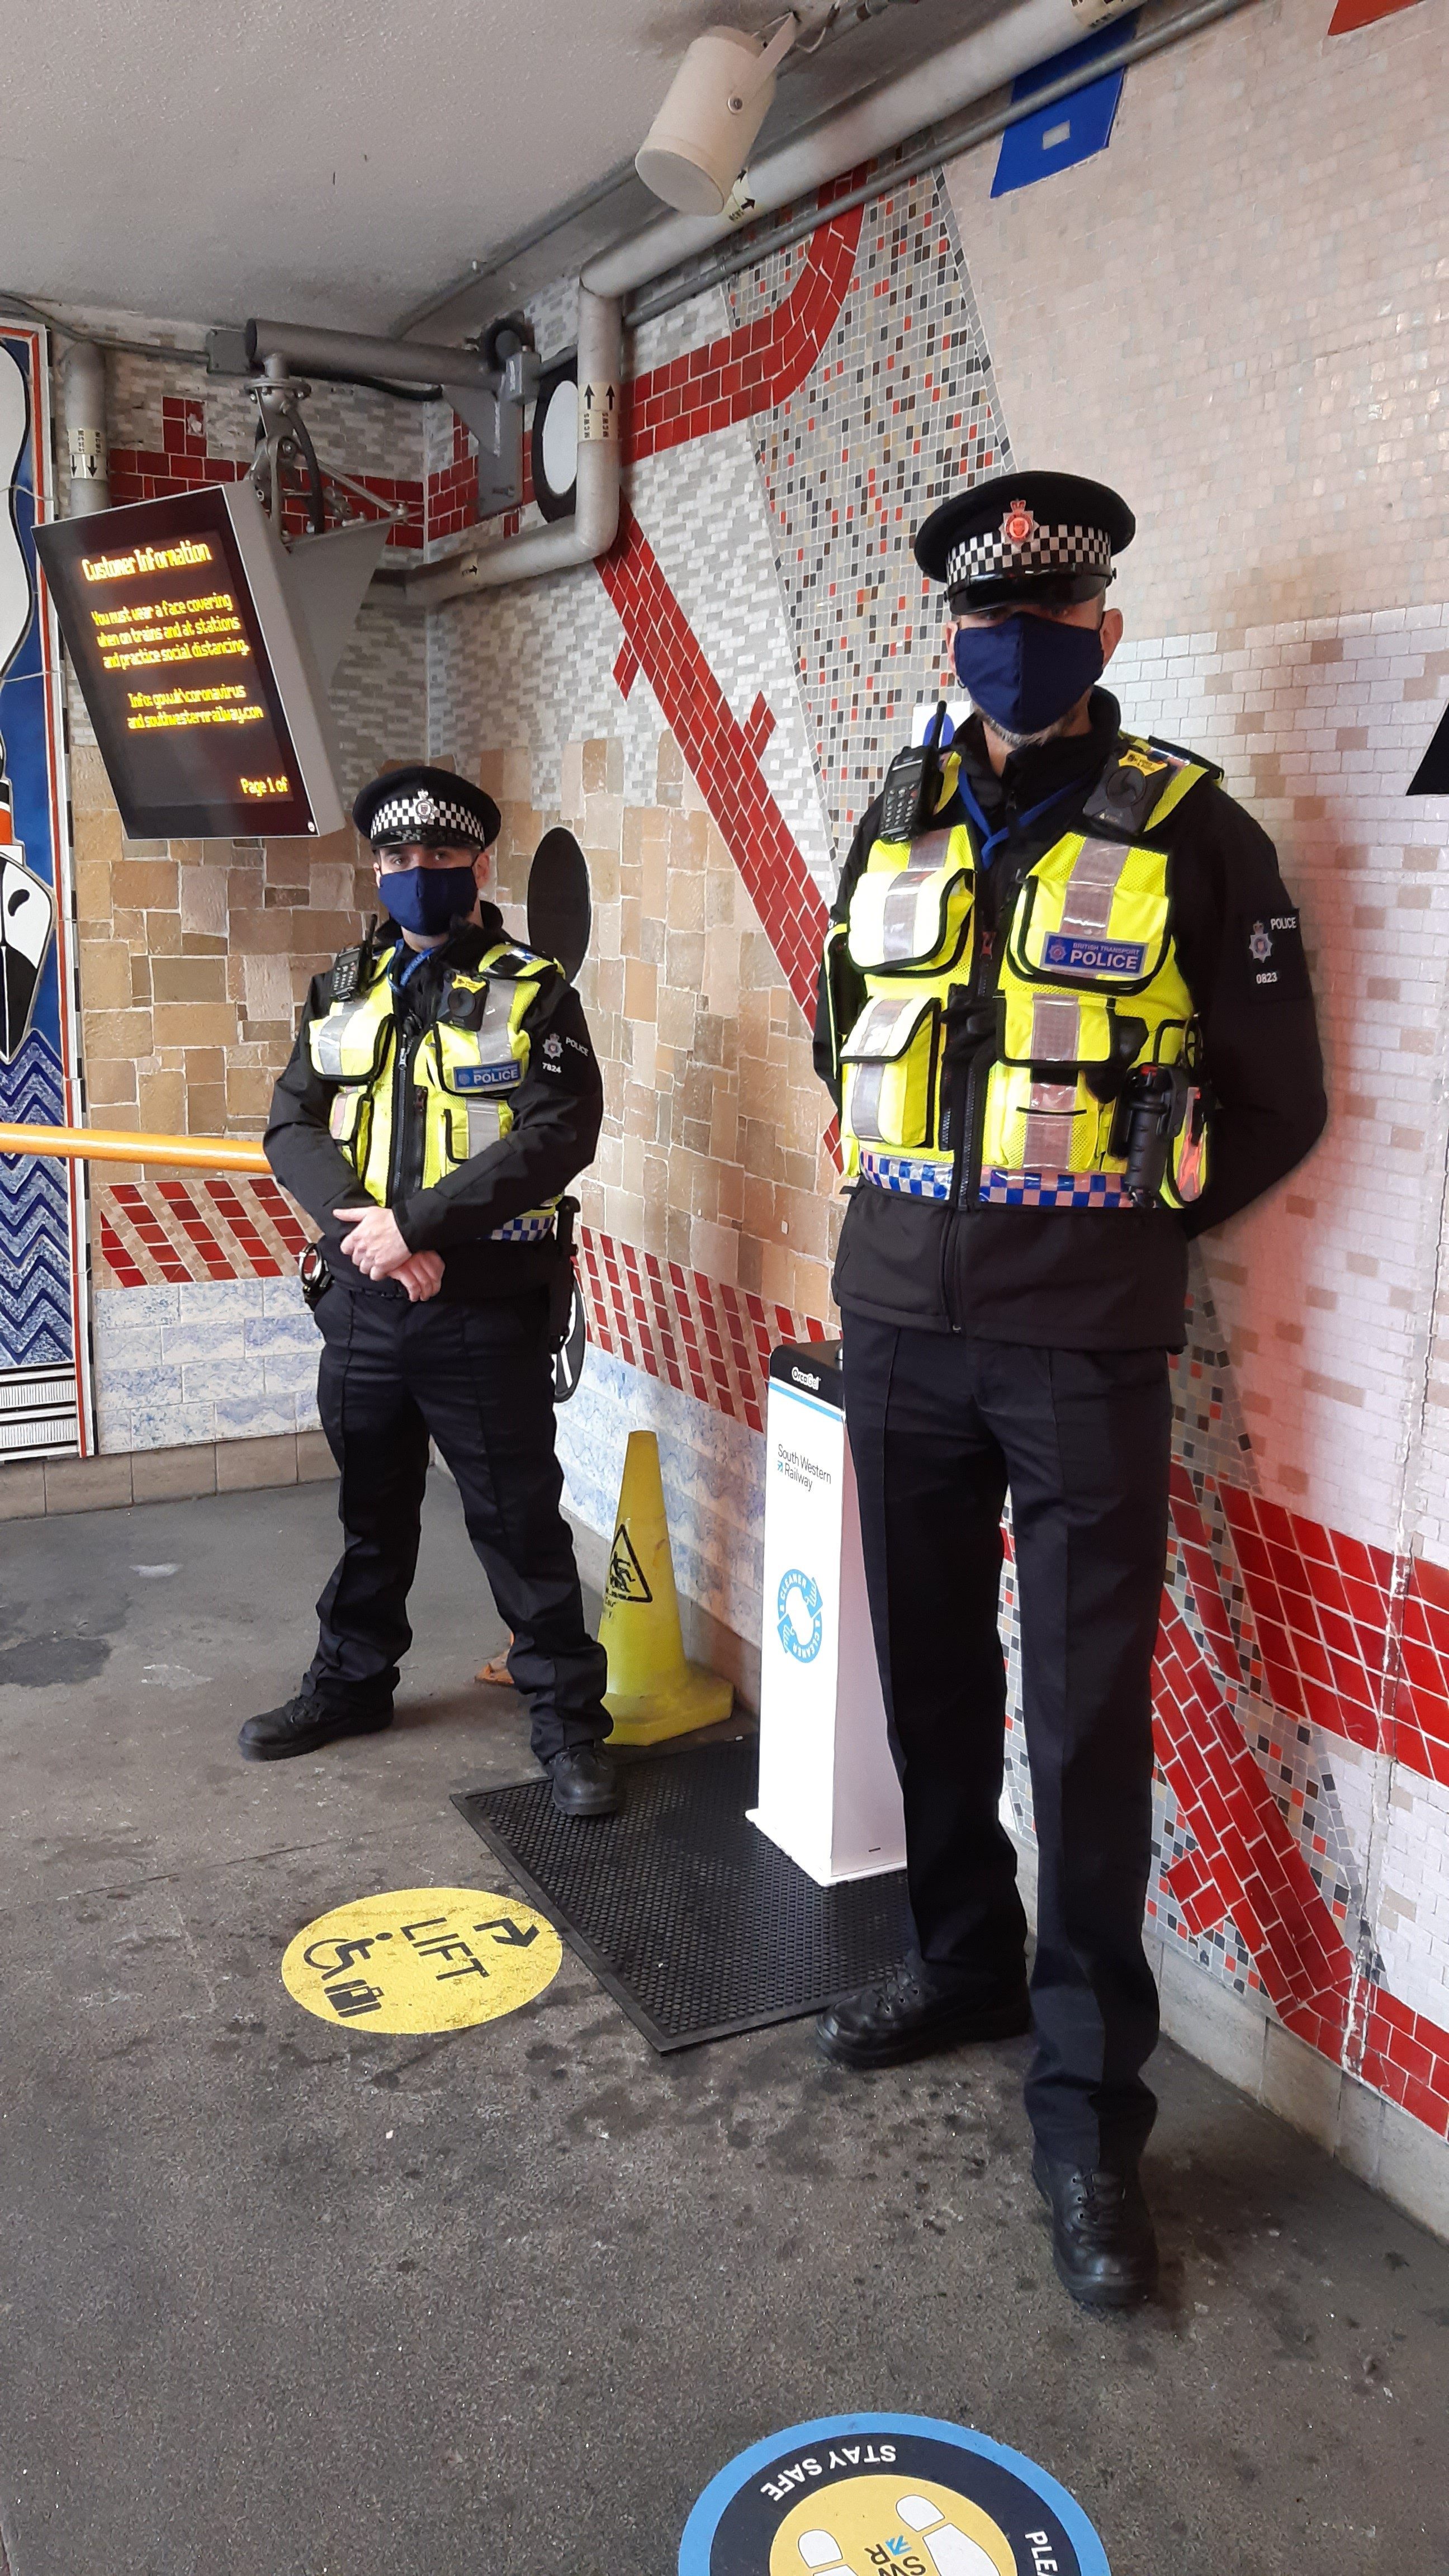 British Transport Police carried out 94 operations across the country